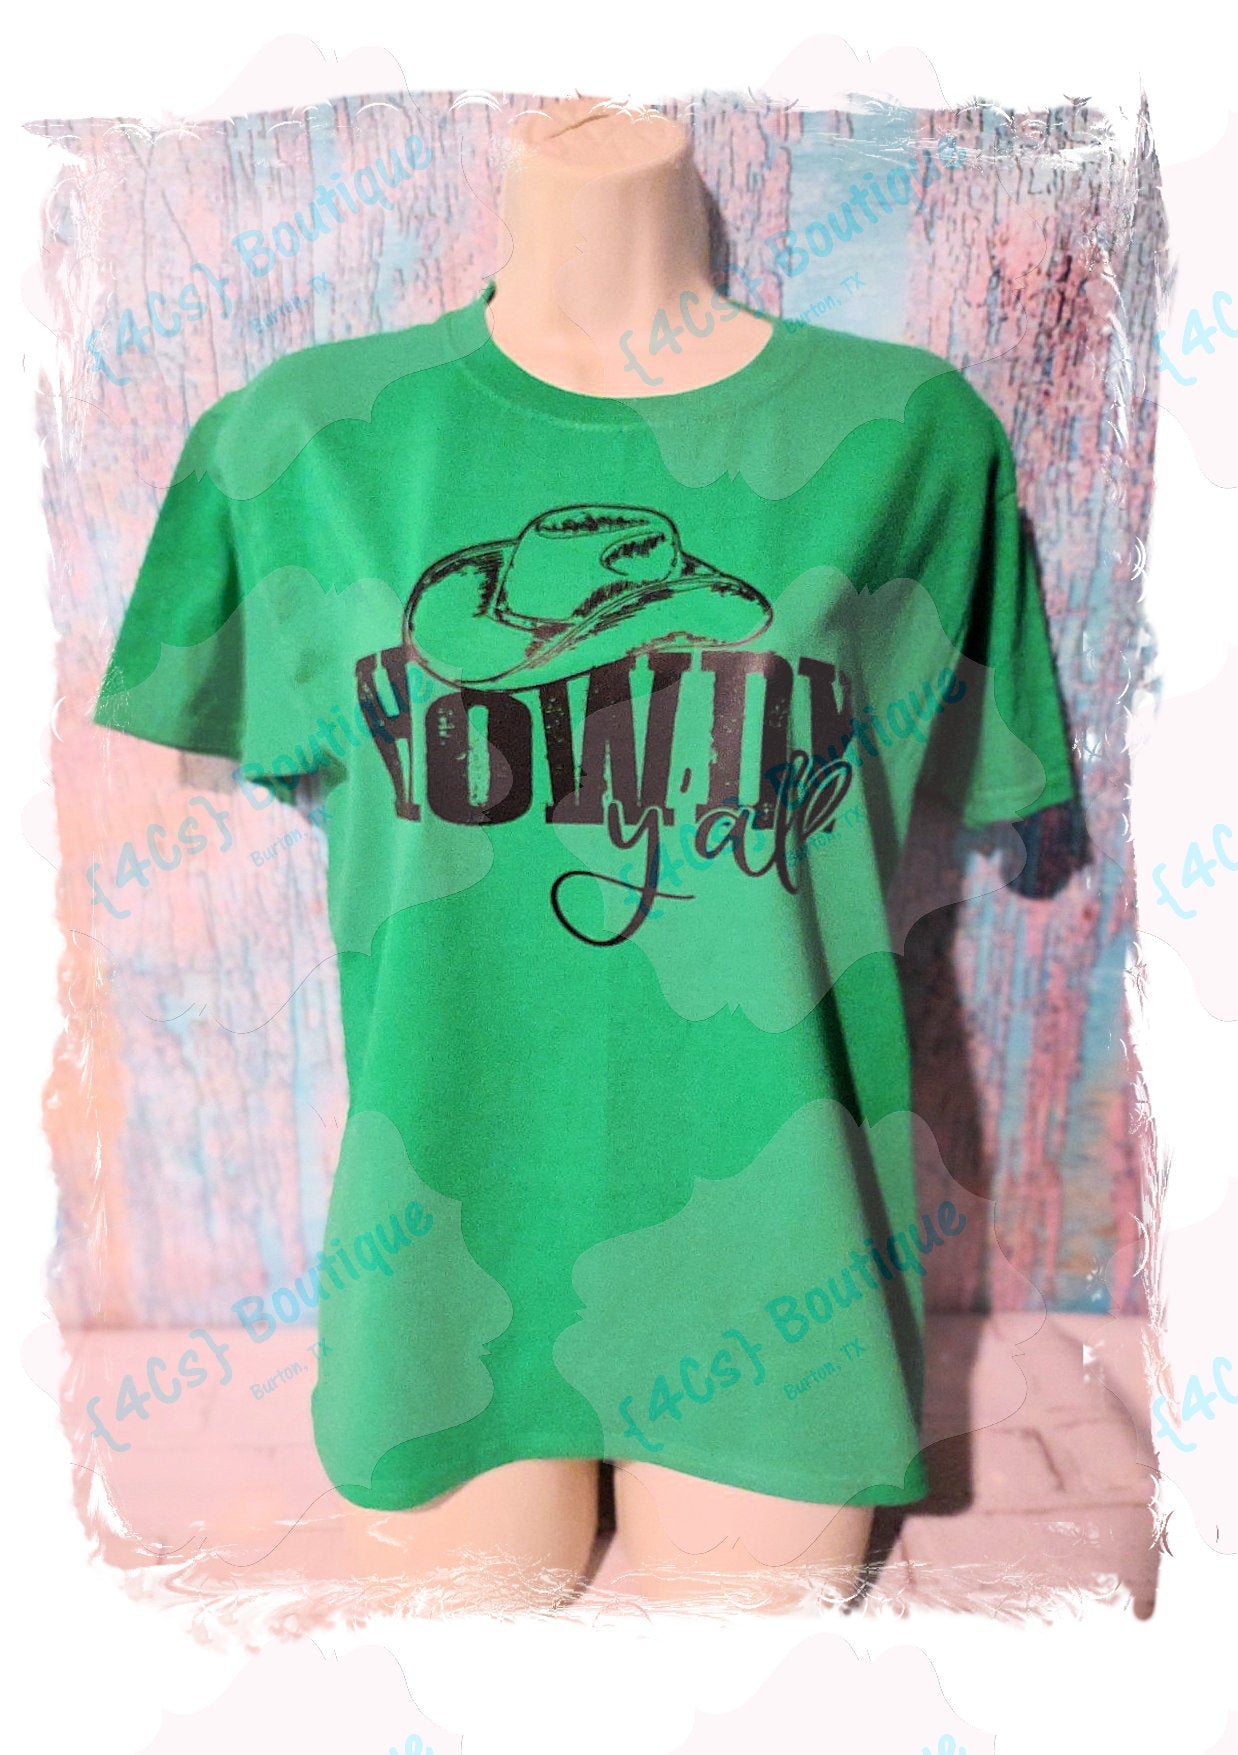 Youth Large Howdy Y'all Green Shirt